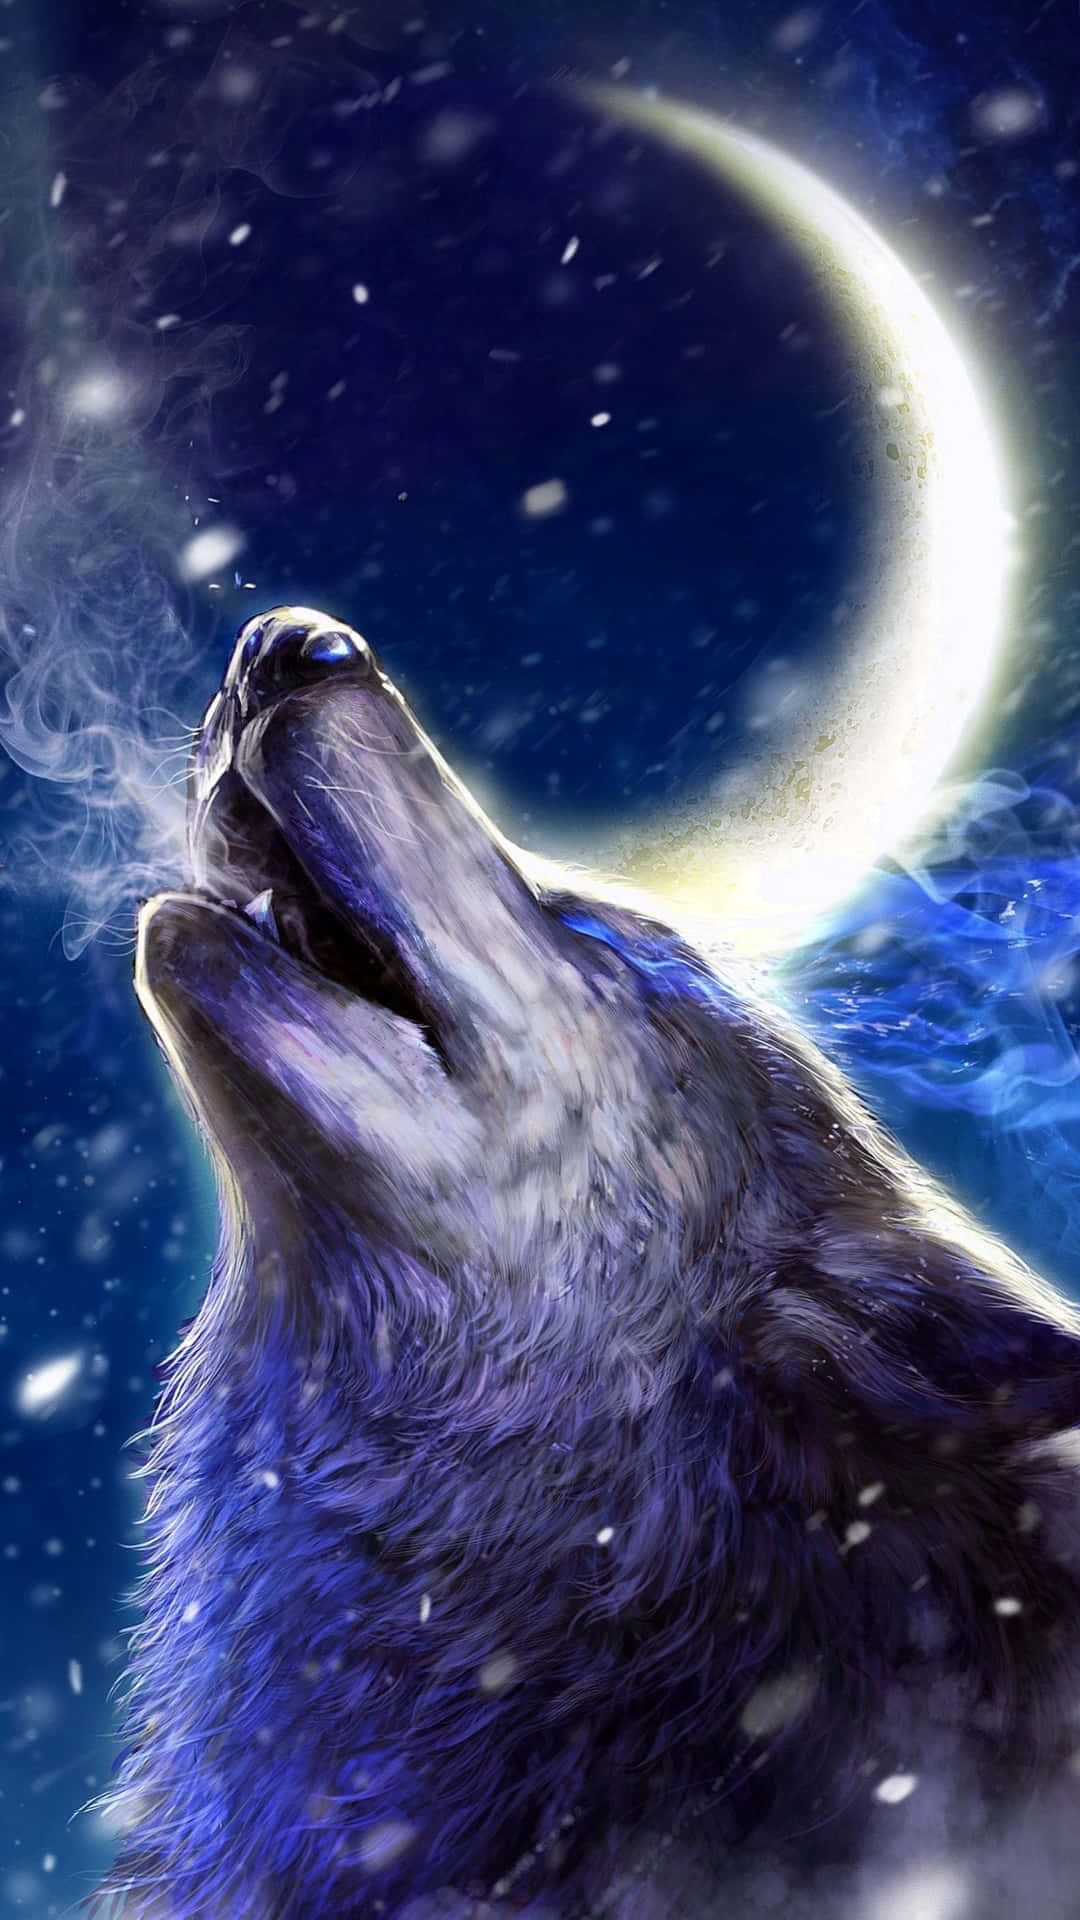 Majestic Howling Wolf Against a Starry Night Sky Wallpaper